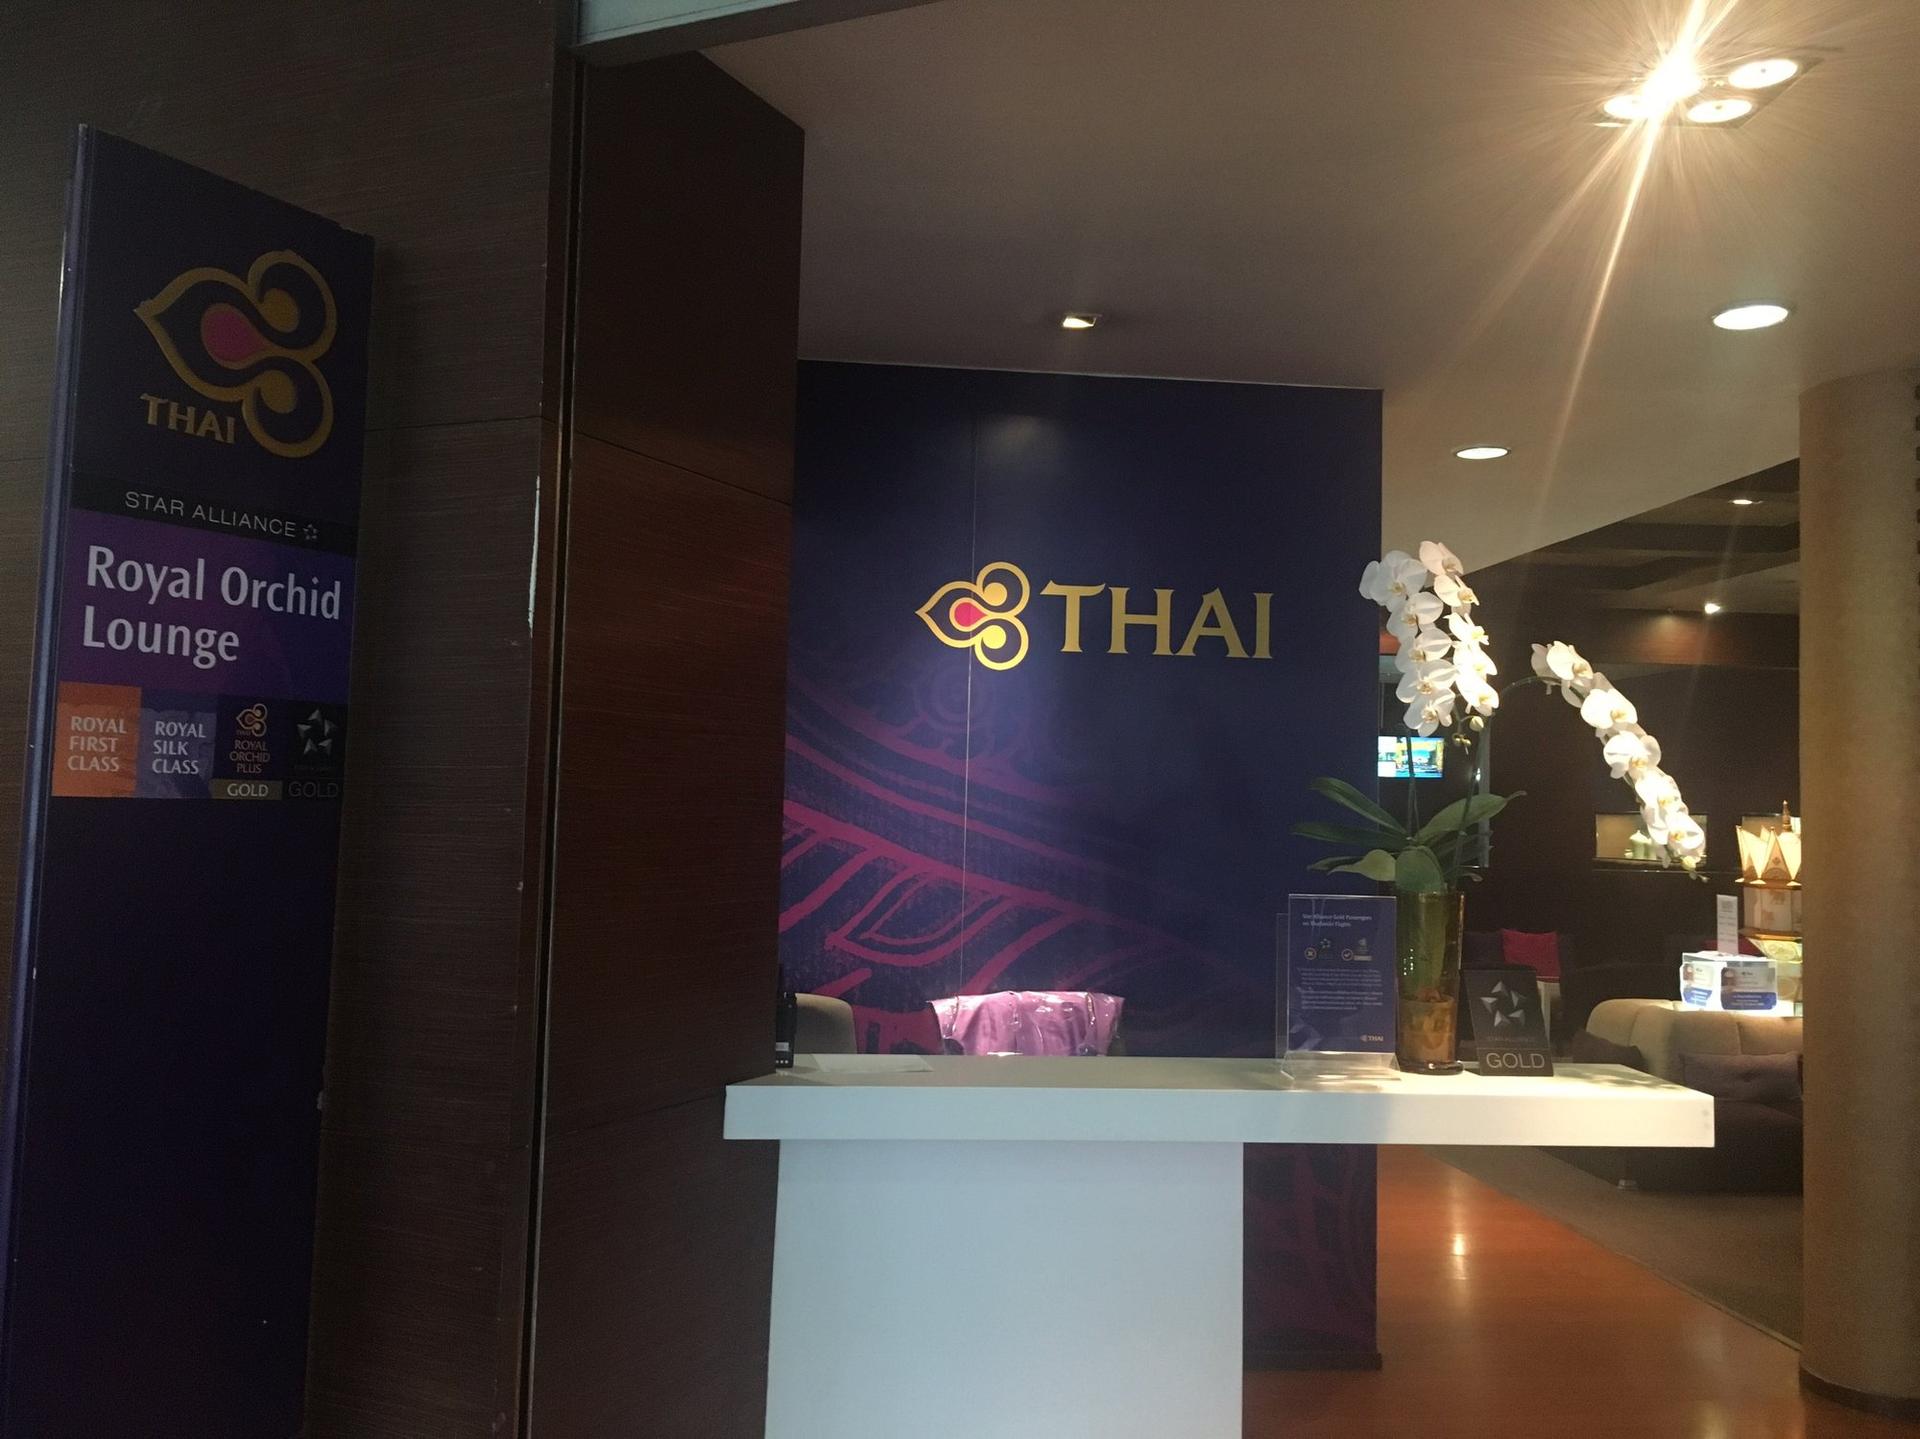 Thai Airways Royal Orchid Lounge image 11 of 22